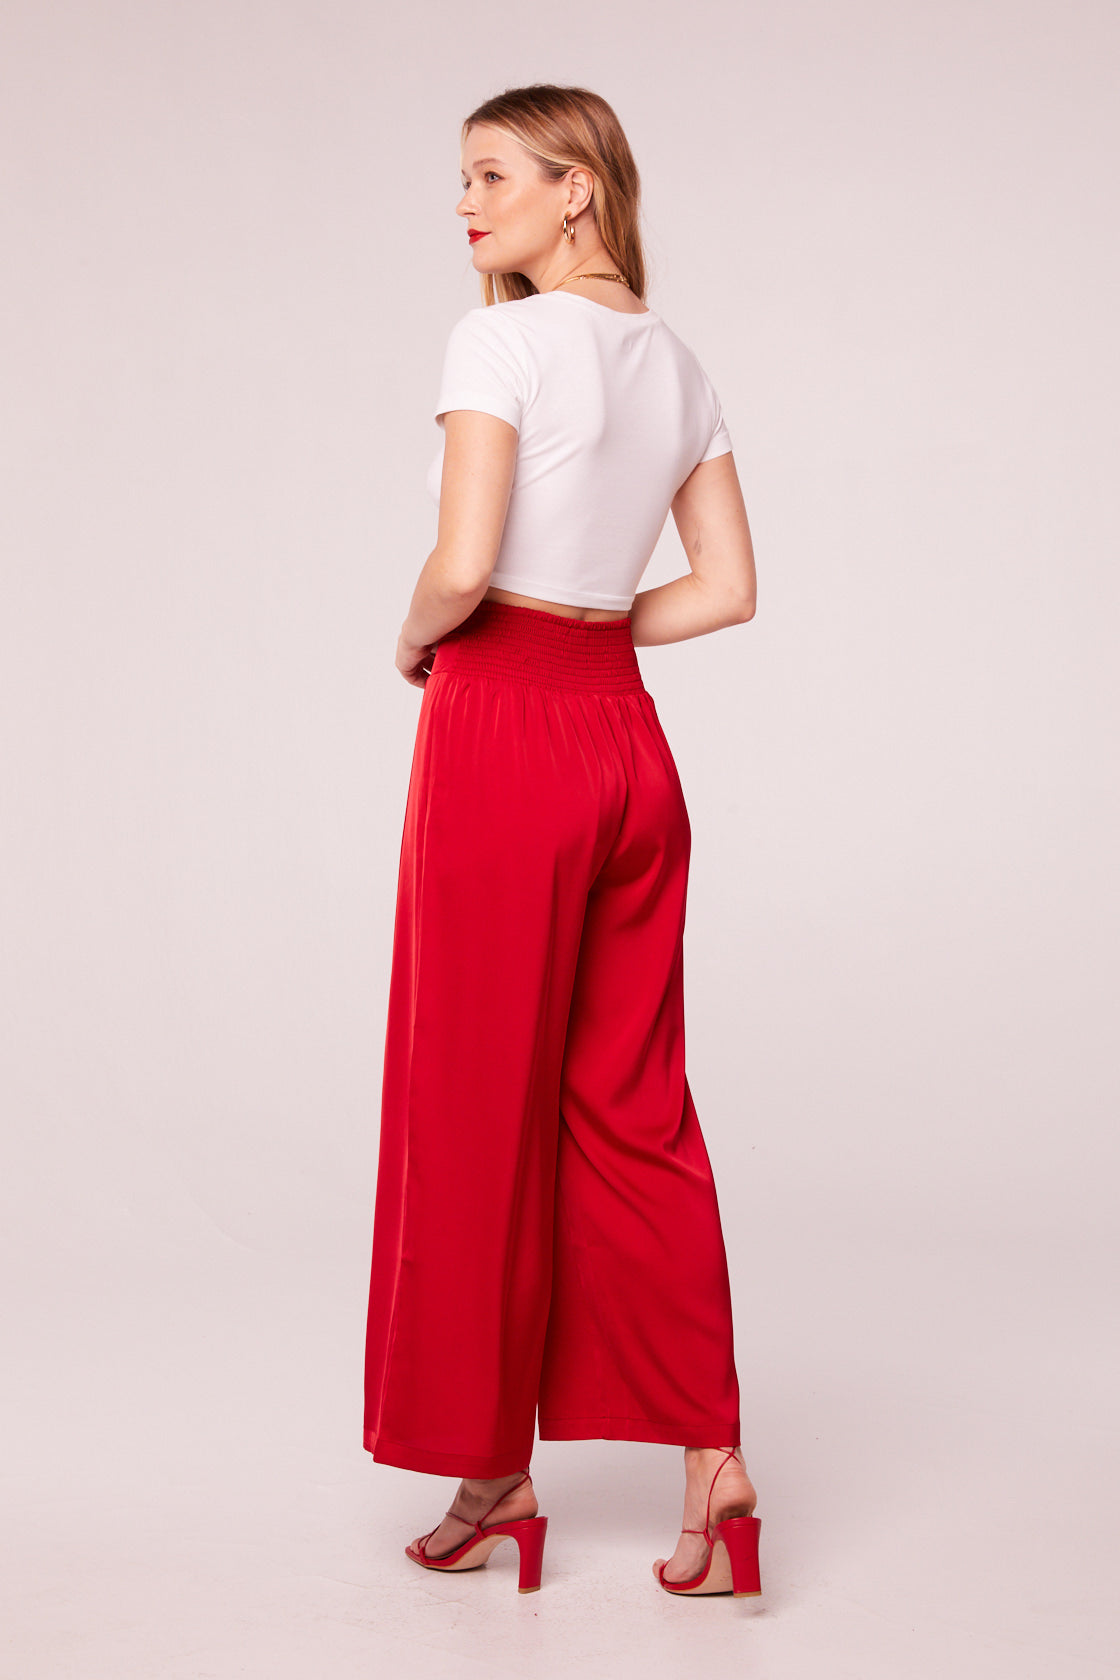 Buy Red Wide Leg Pants With High Front Slit, Red High Waist Palazzo Pants  for Women, Special Event Women's High Rise Pants Online in India - Etsy